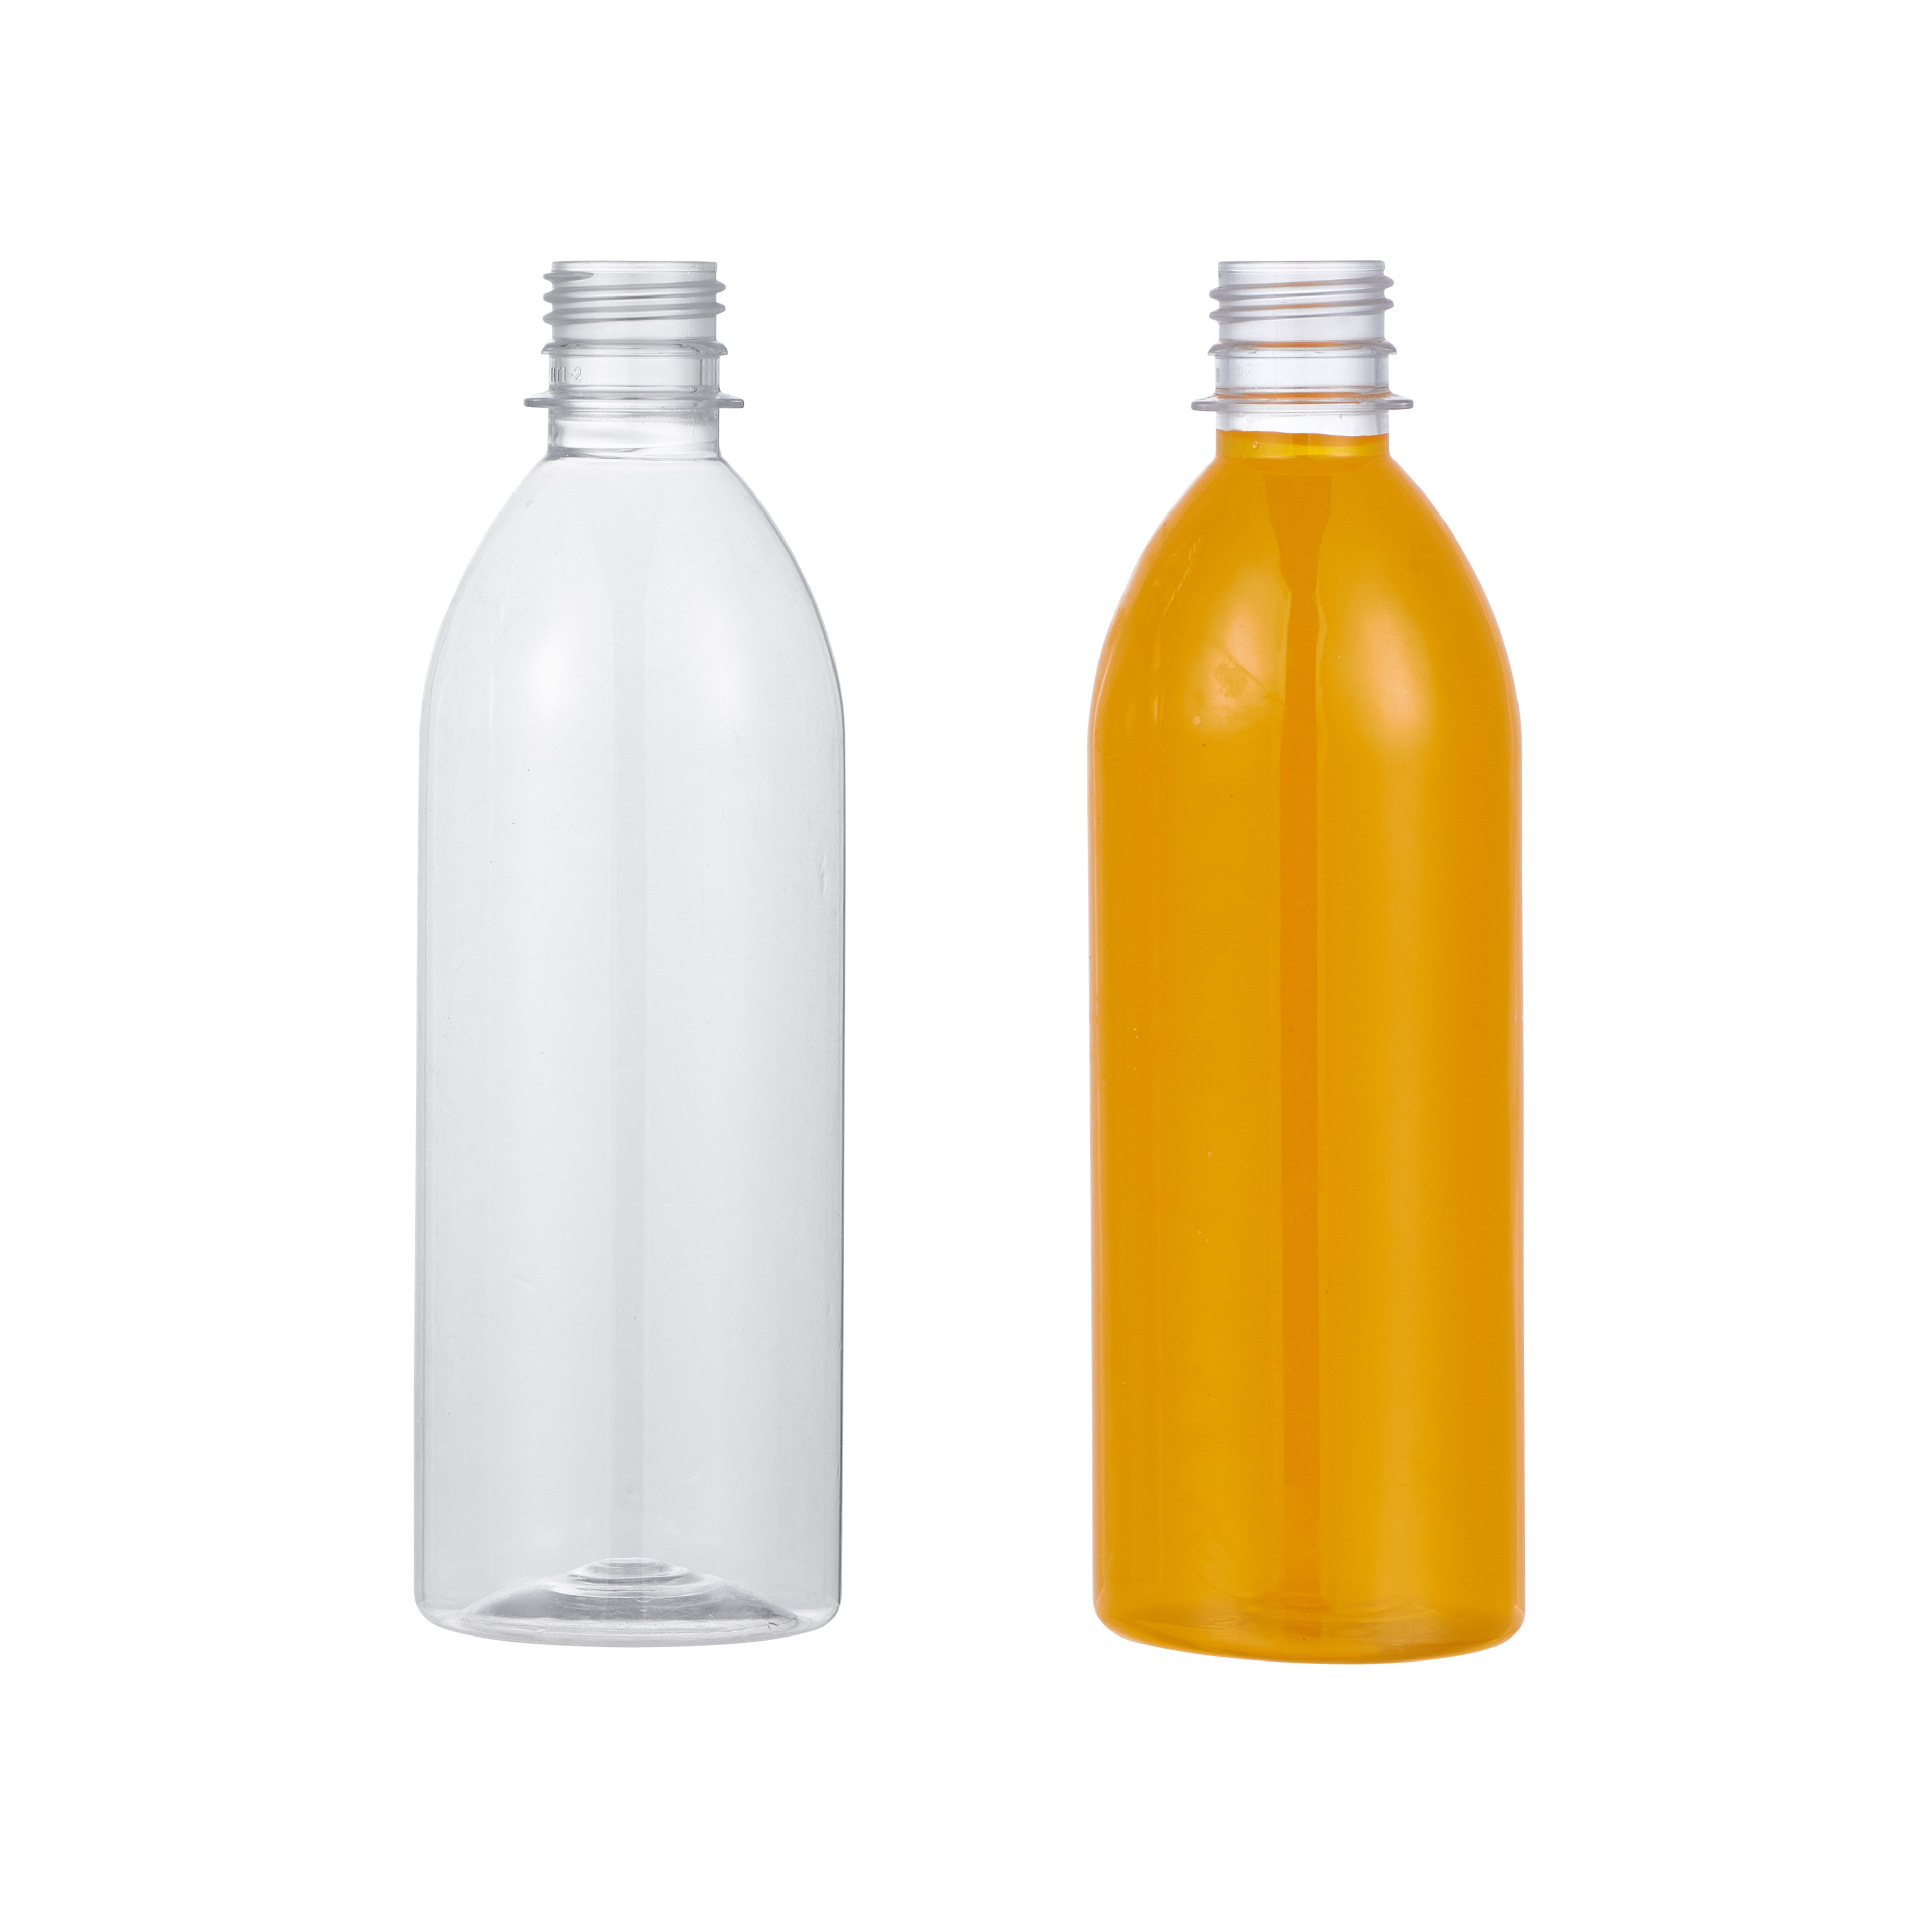 Eco-Friendly Plastic Bottle - Ideal for Storage and Hydration